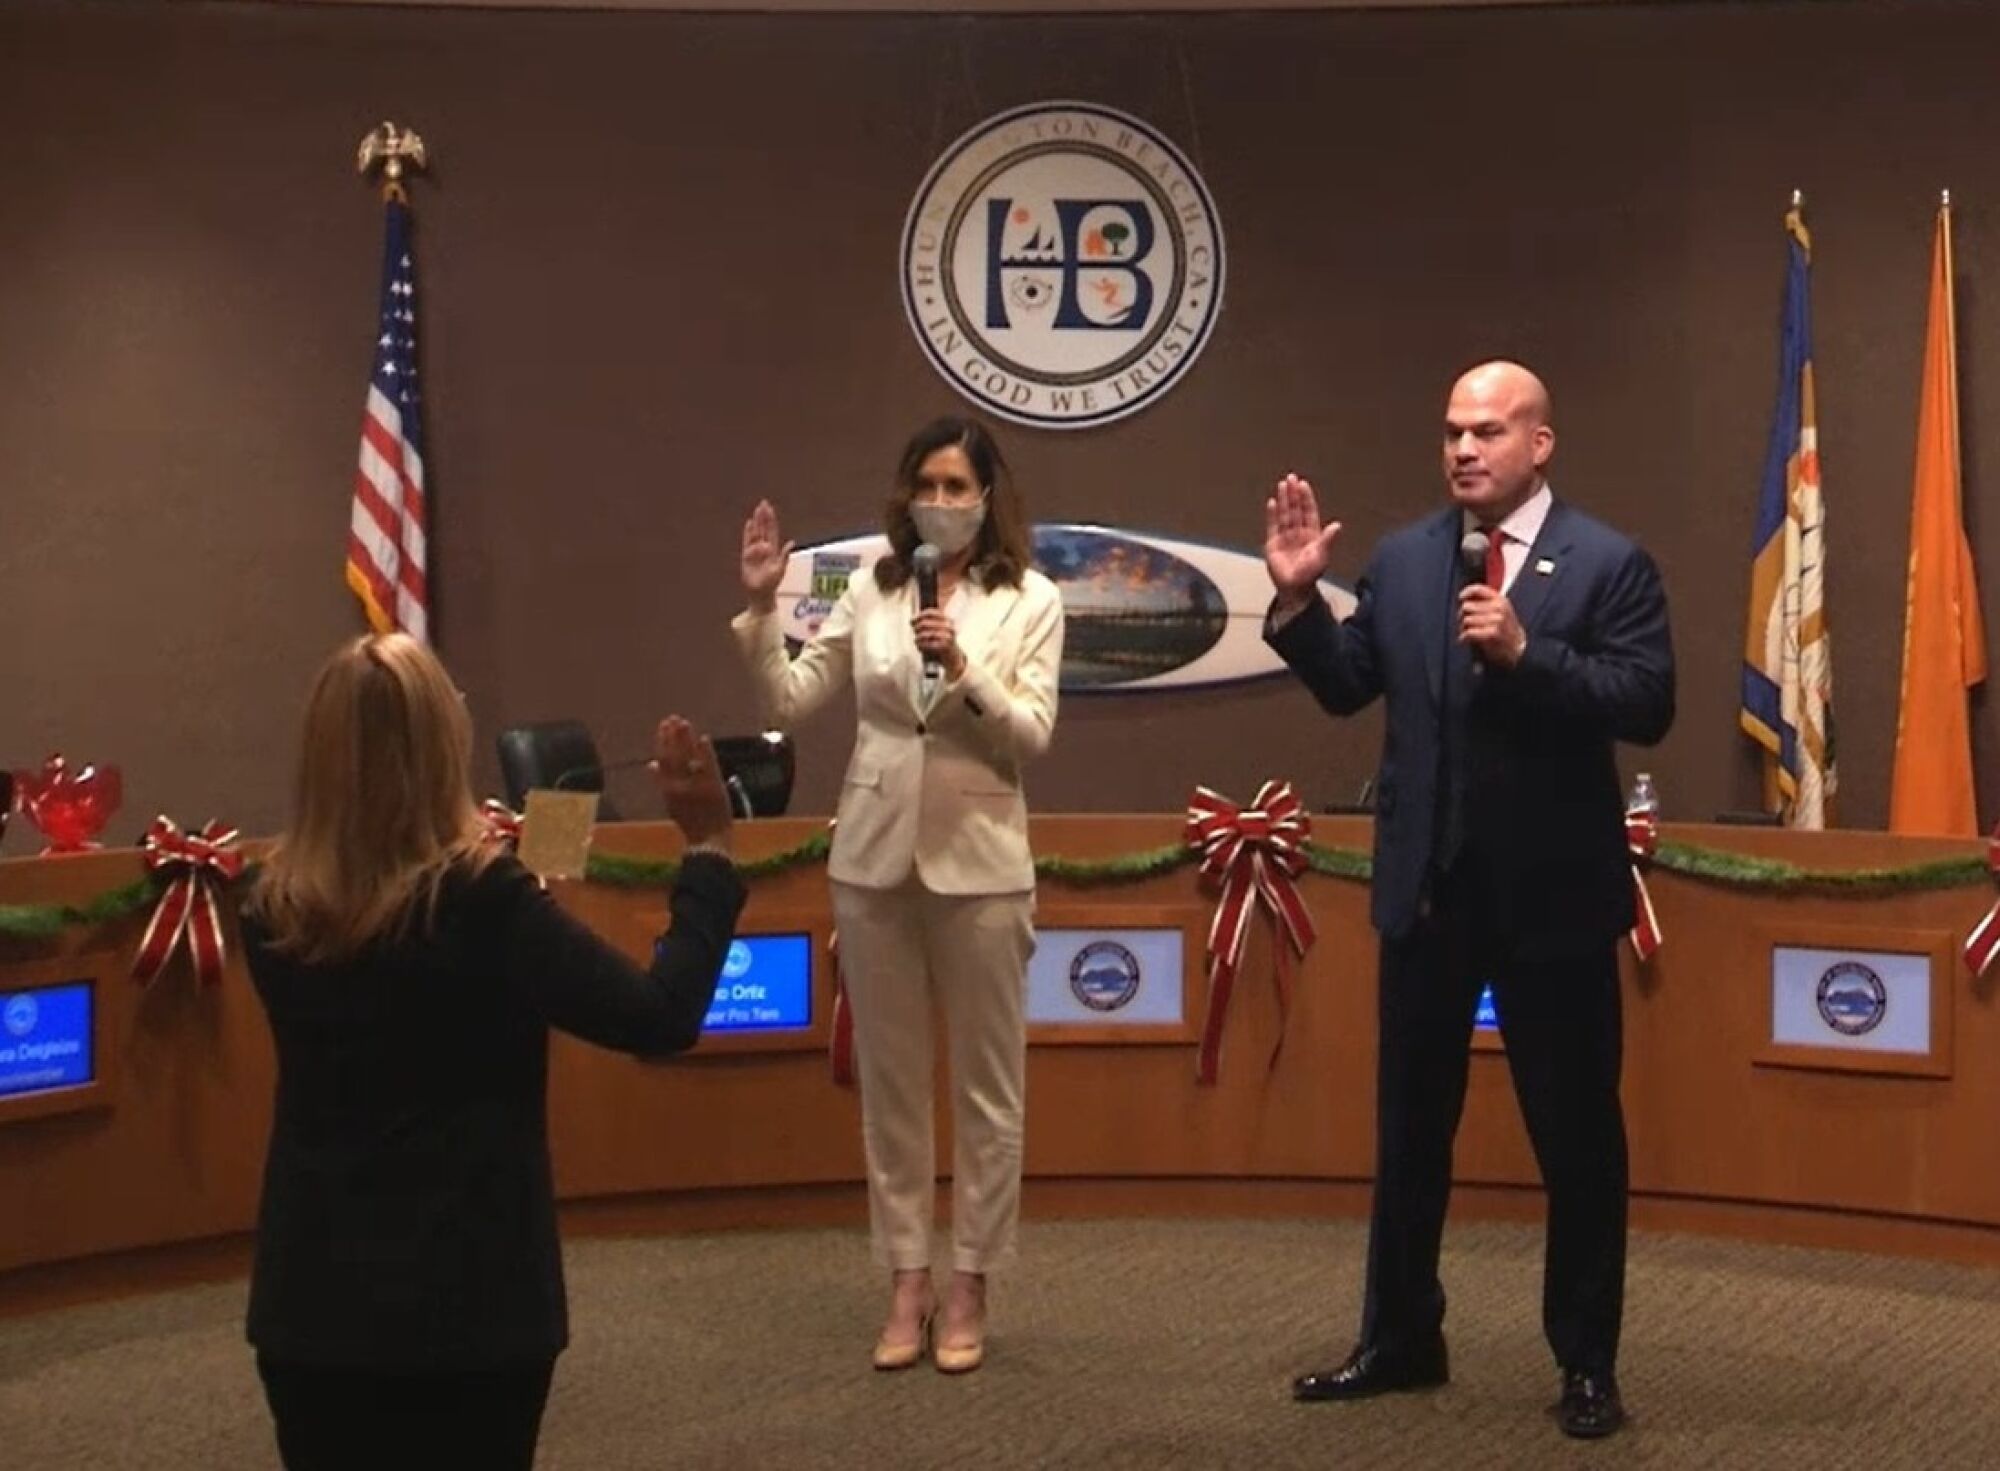 Kim Carr and Tito Ortiz stand with right hands raised inside council chambers.